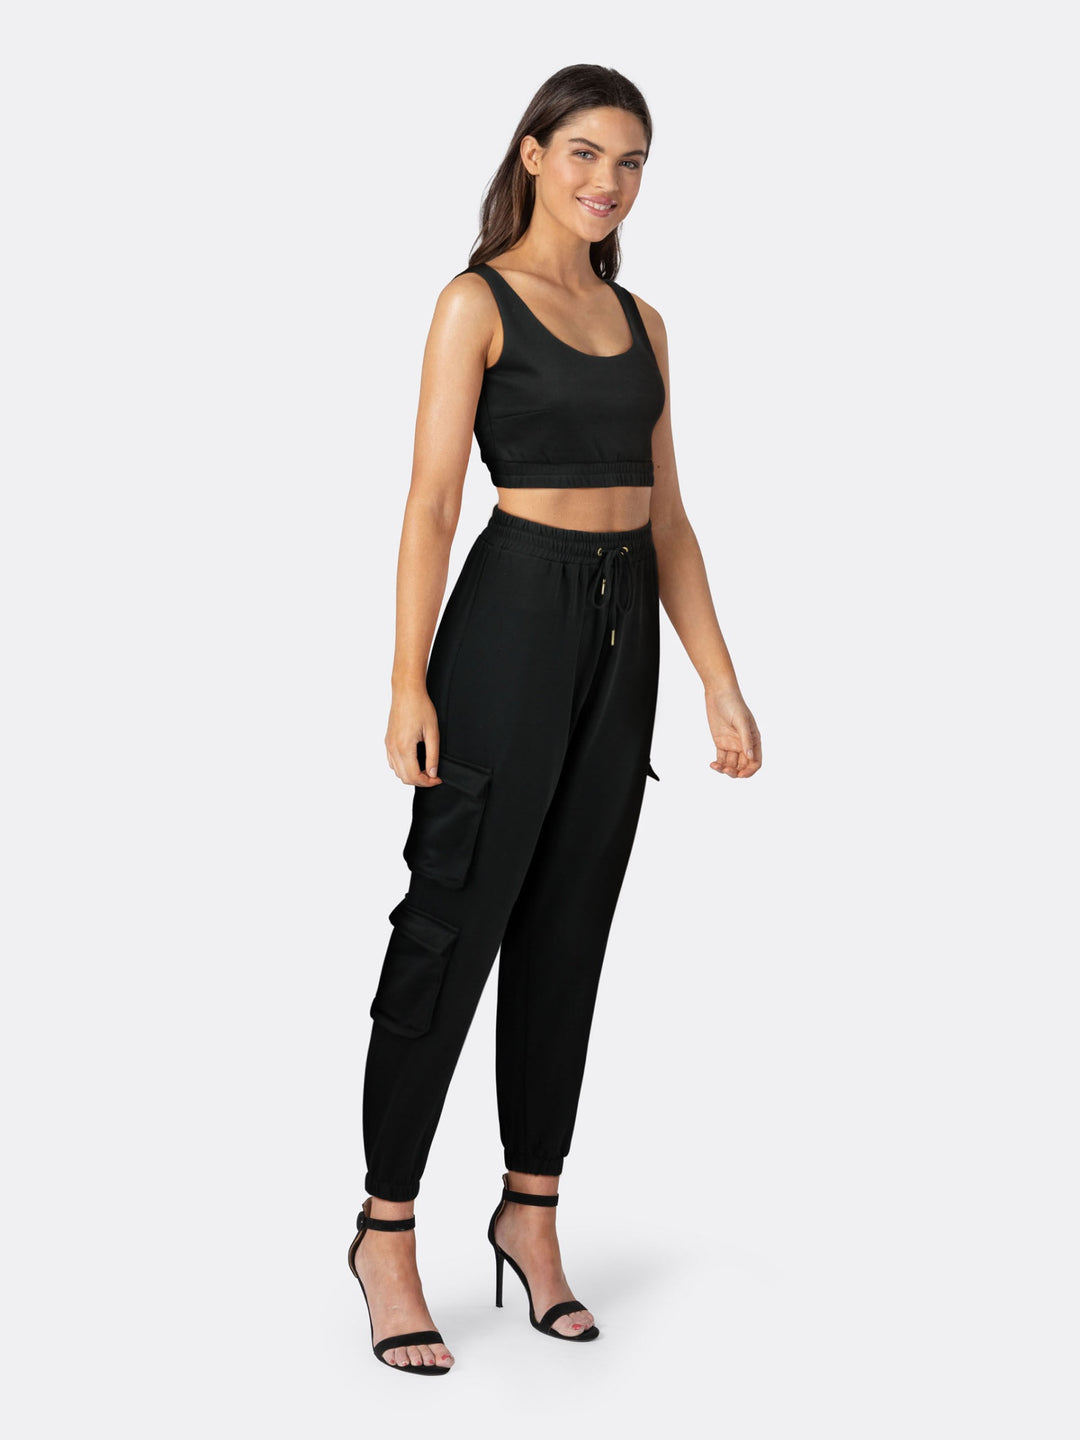 Pack of Joggers with Pockets and Crop Top Black Side | Jolovies